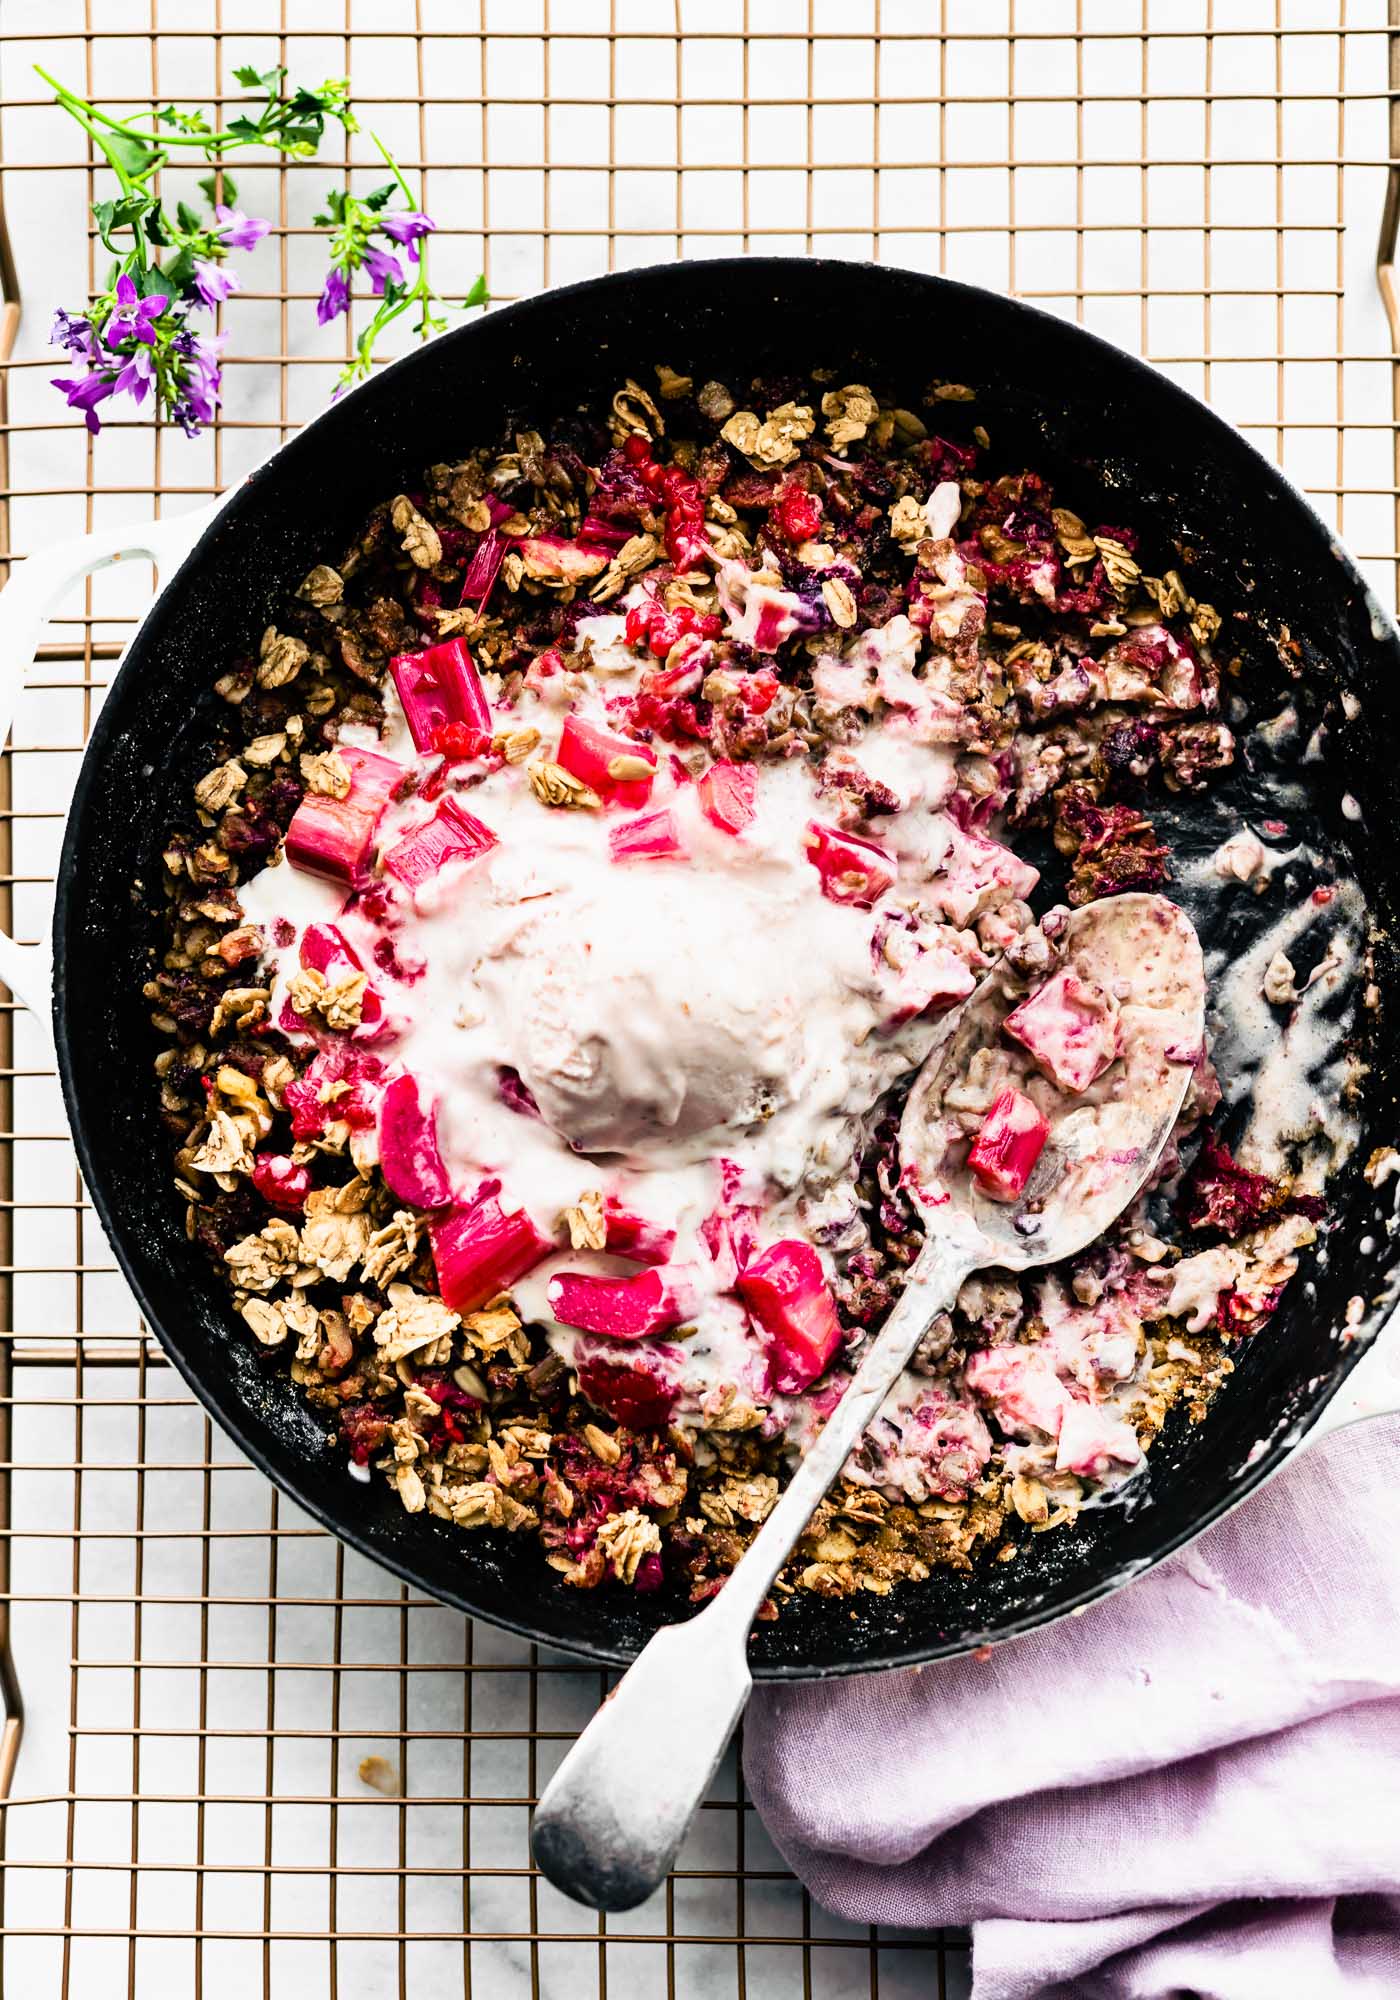 a skillet filled with berry rhubarb crumble, topped with melted ice cream and fruit. Spoon in the middle.